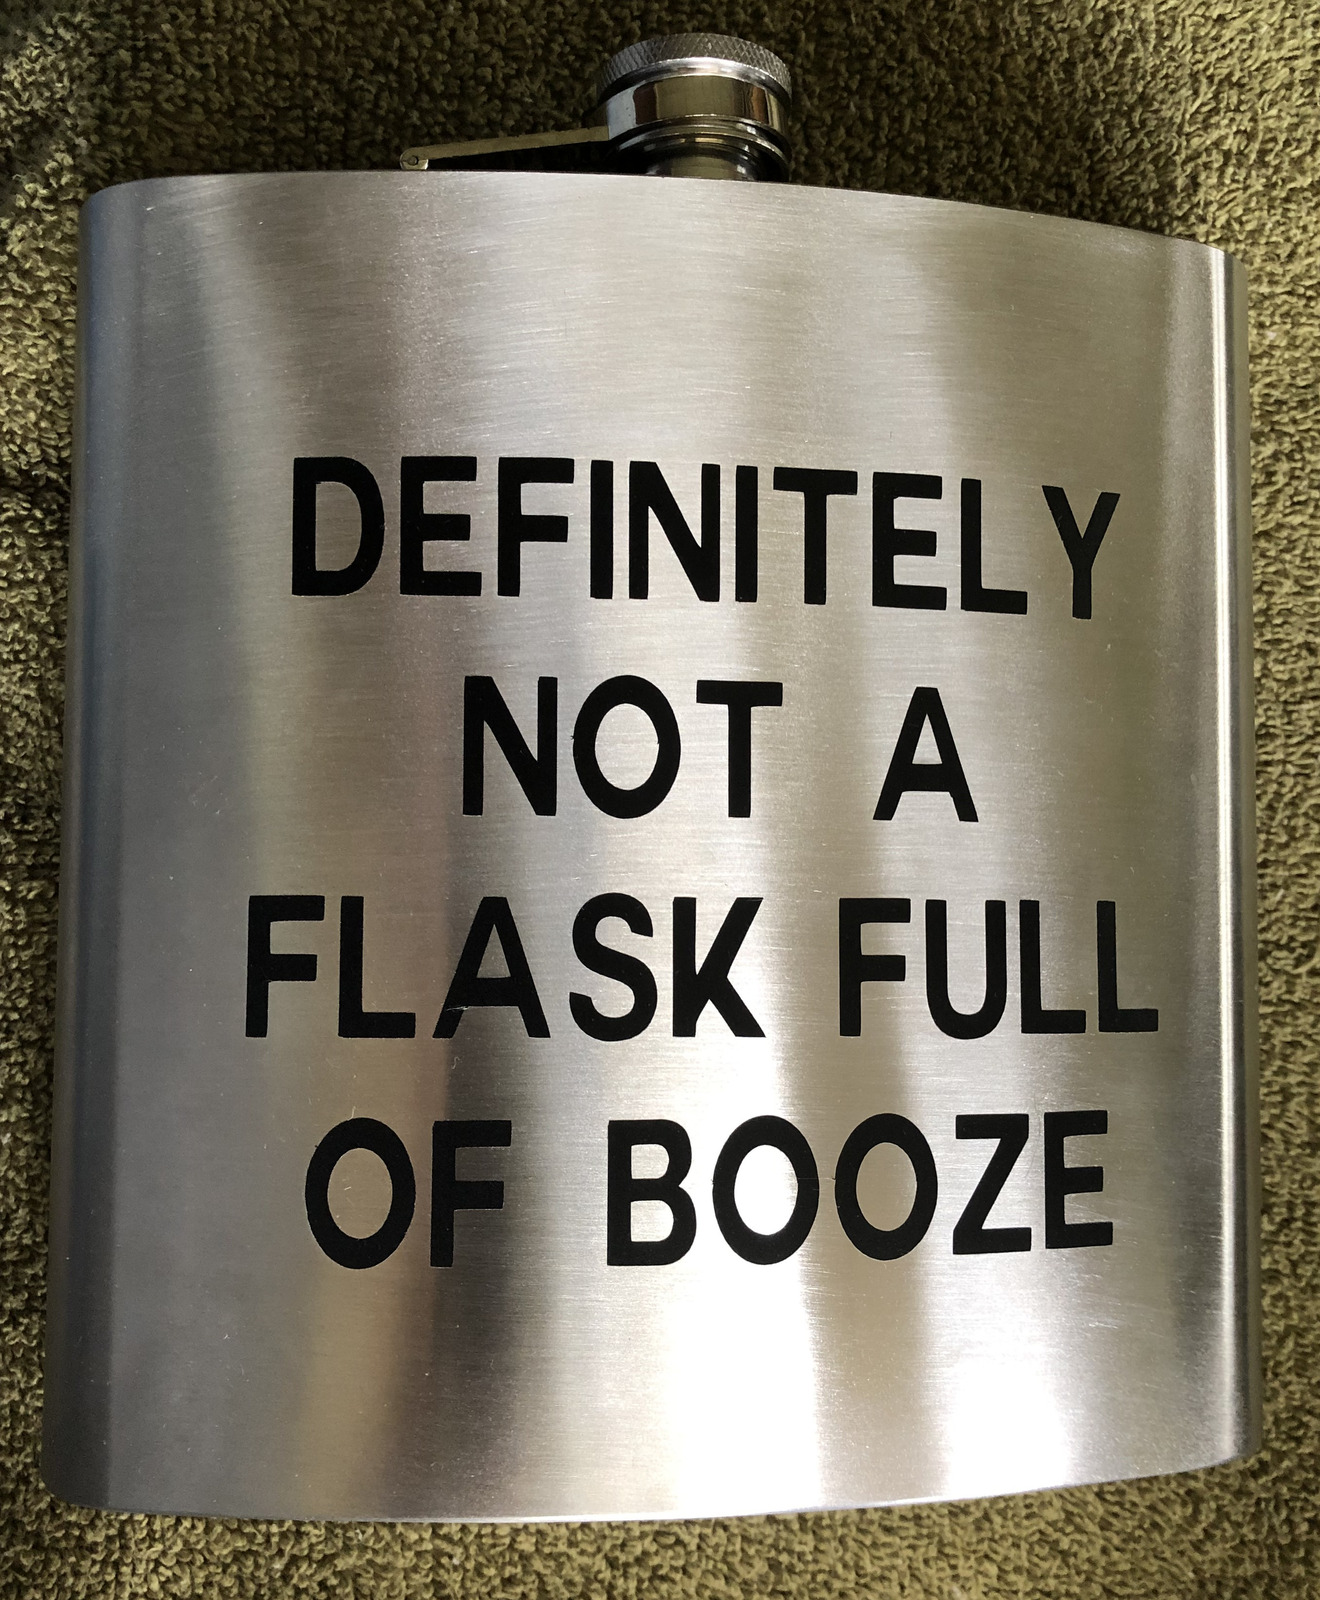 Large stainless steel flask (booze) - $15.00